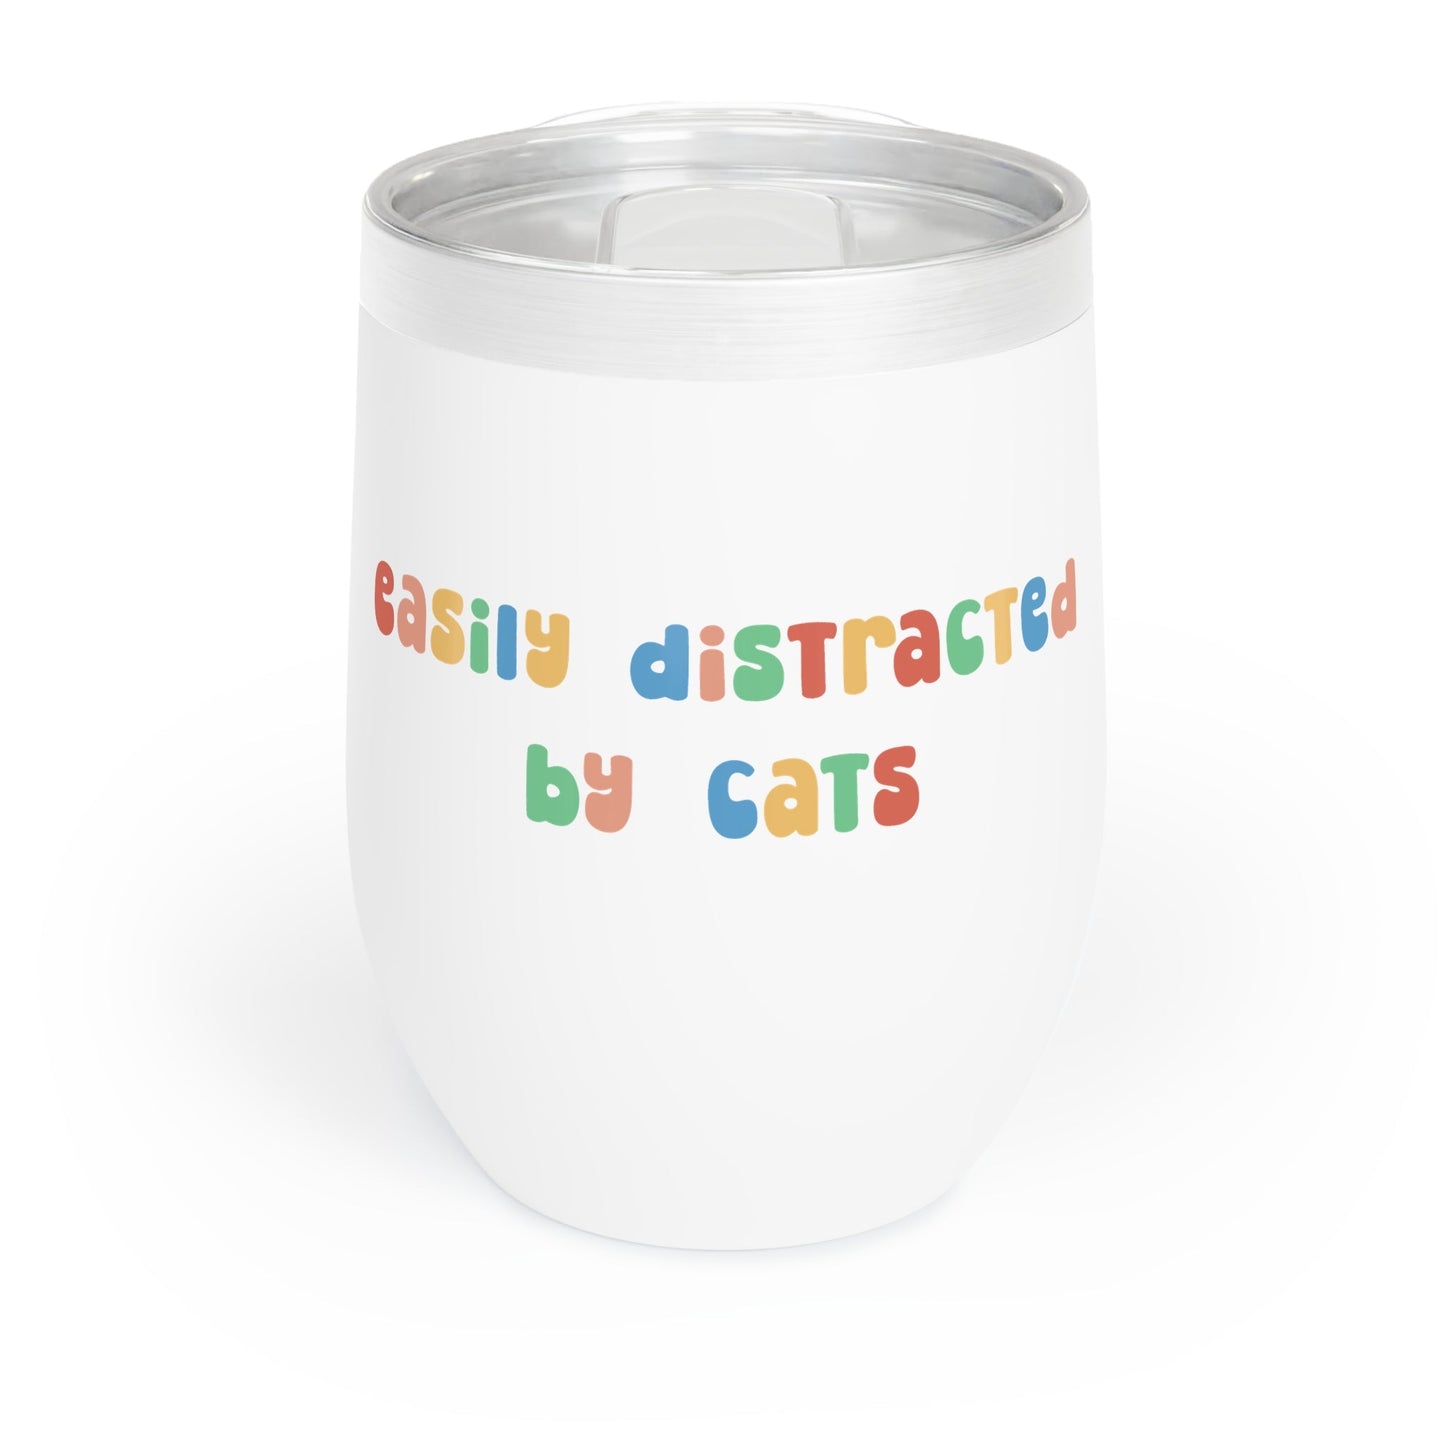 Easily Distracted by Cats | Wine Tumbler - Detezi Designs-32245351899233048415